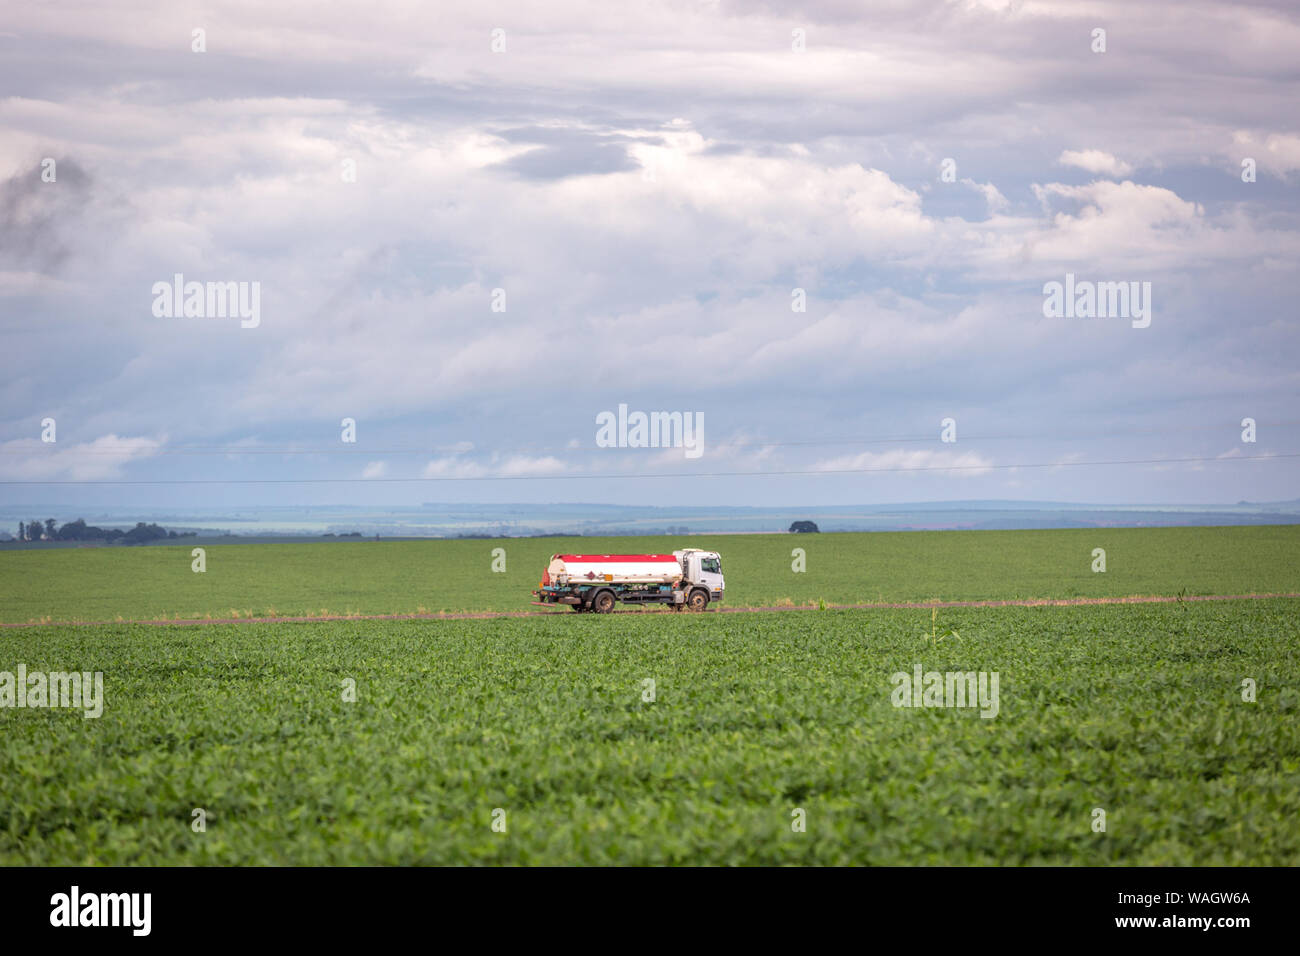 A water truck crossing a huge soybean farm in the country side of Brazil Stock Photo